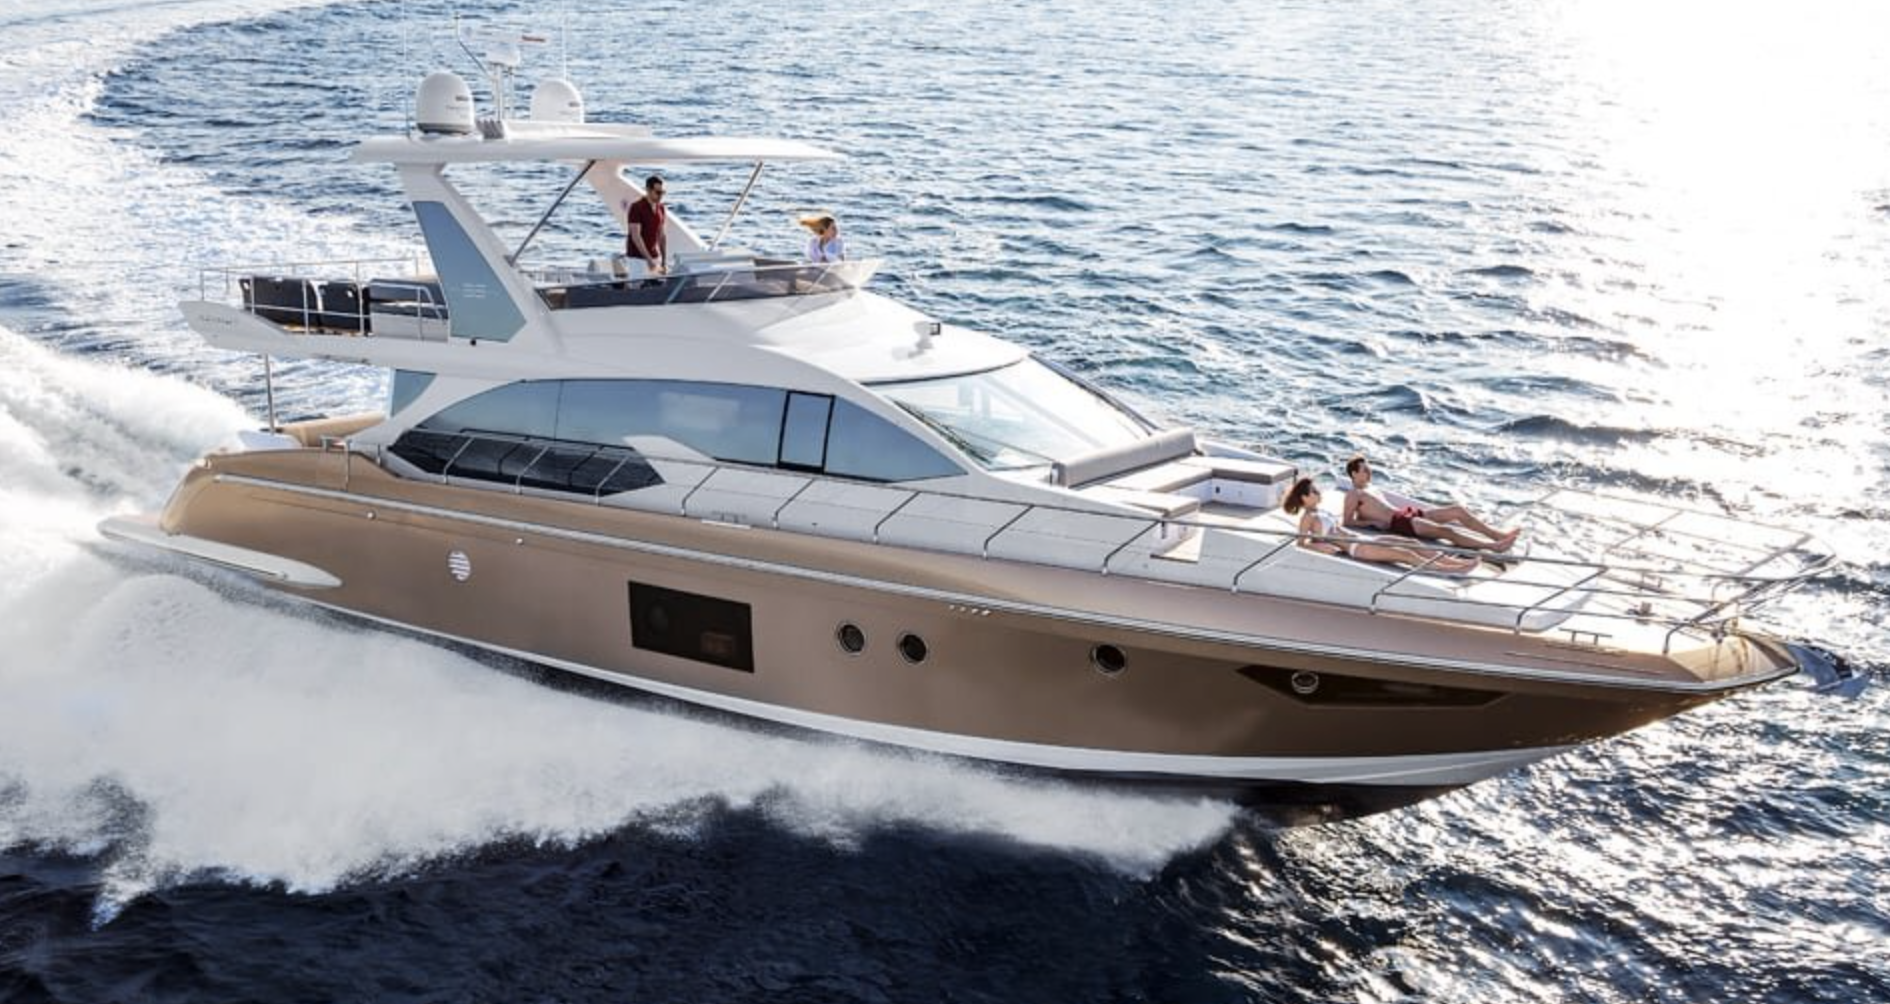 66 ft Azimut Auro | From $4500 | 13 guest max